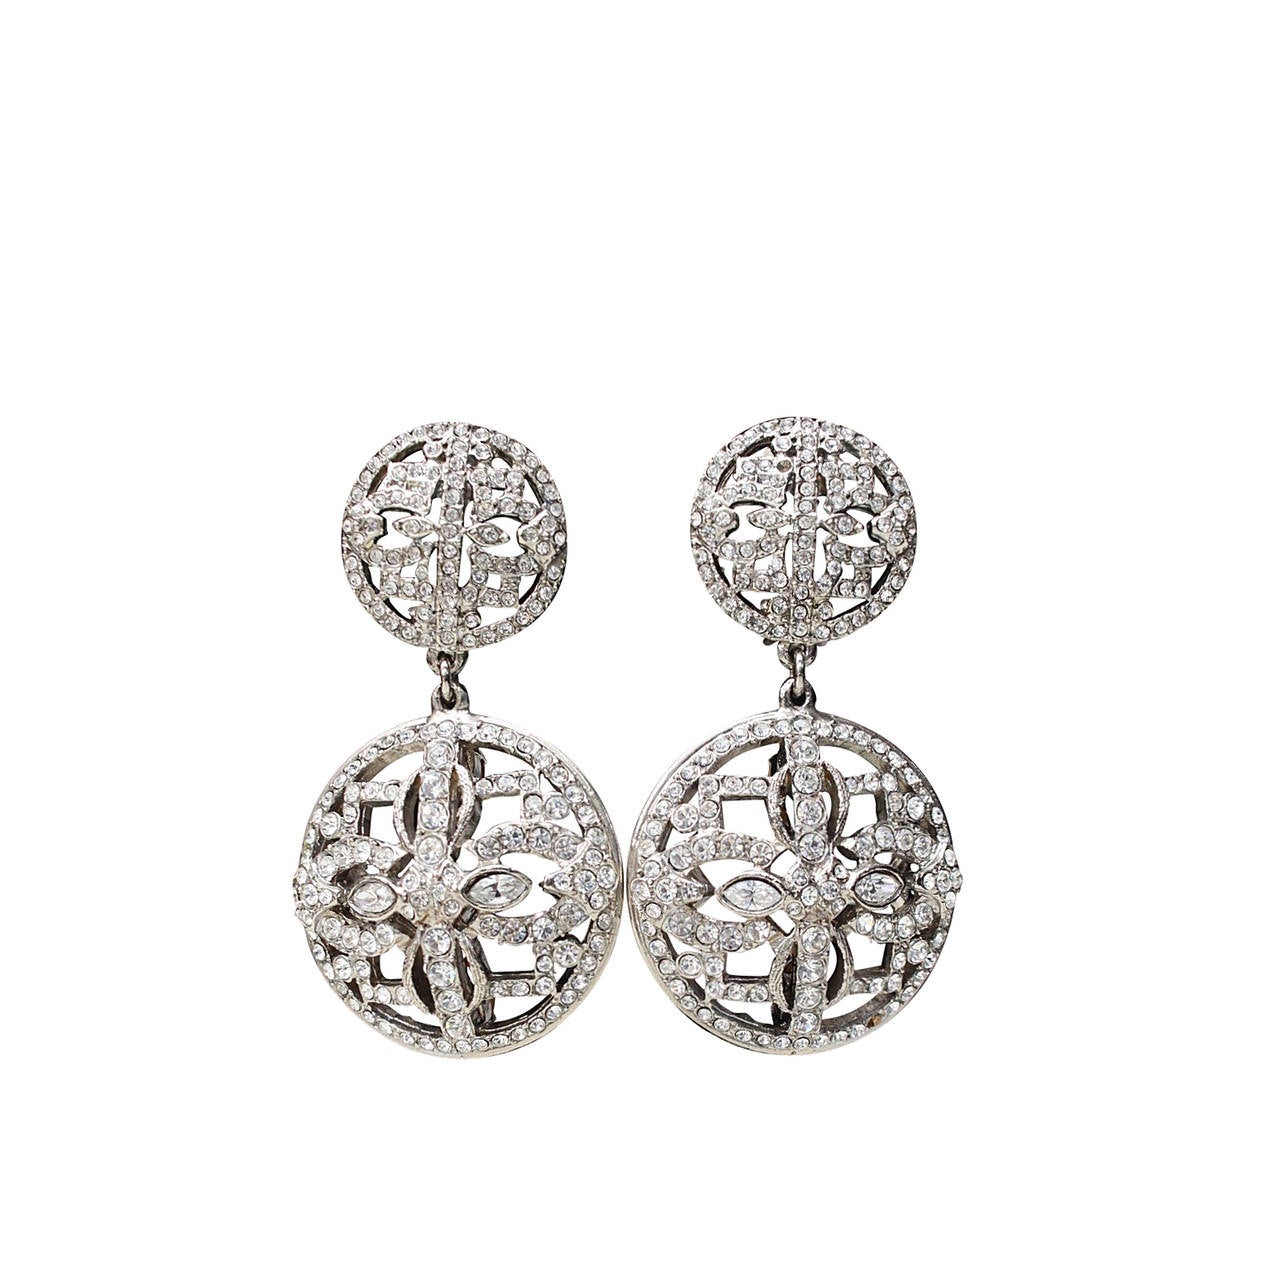 Christian Dior Silver Metal and Crystals Pendant Earrings